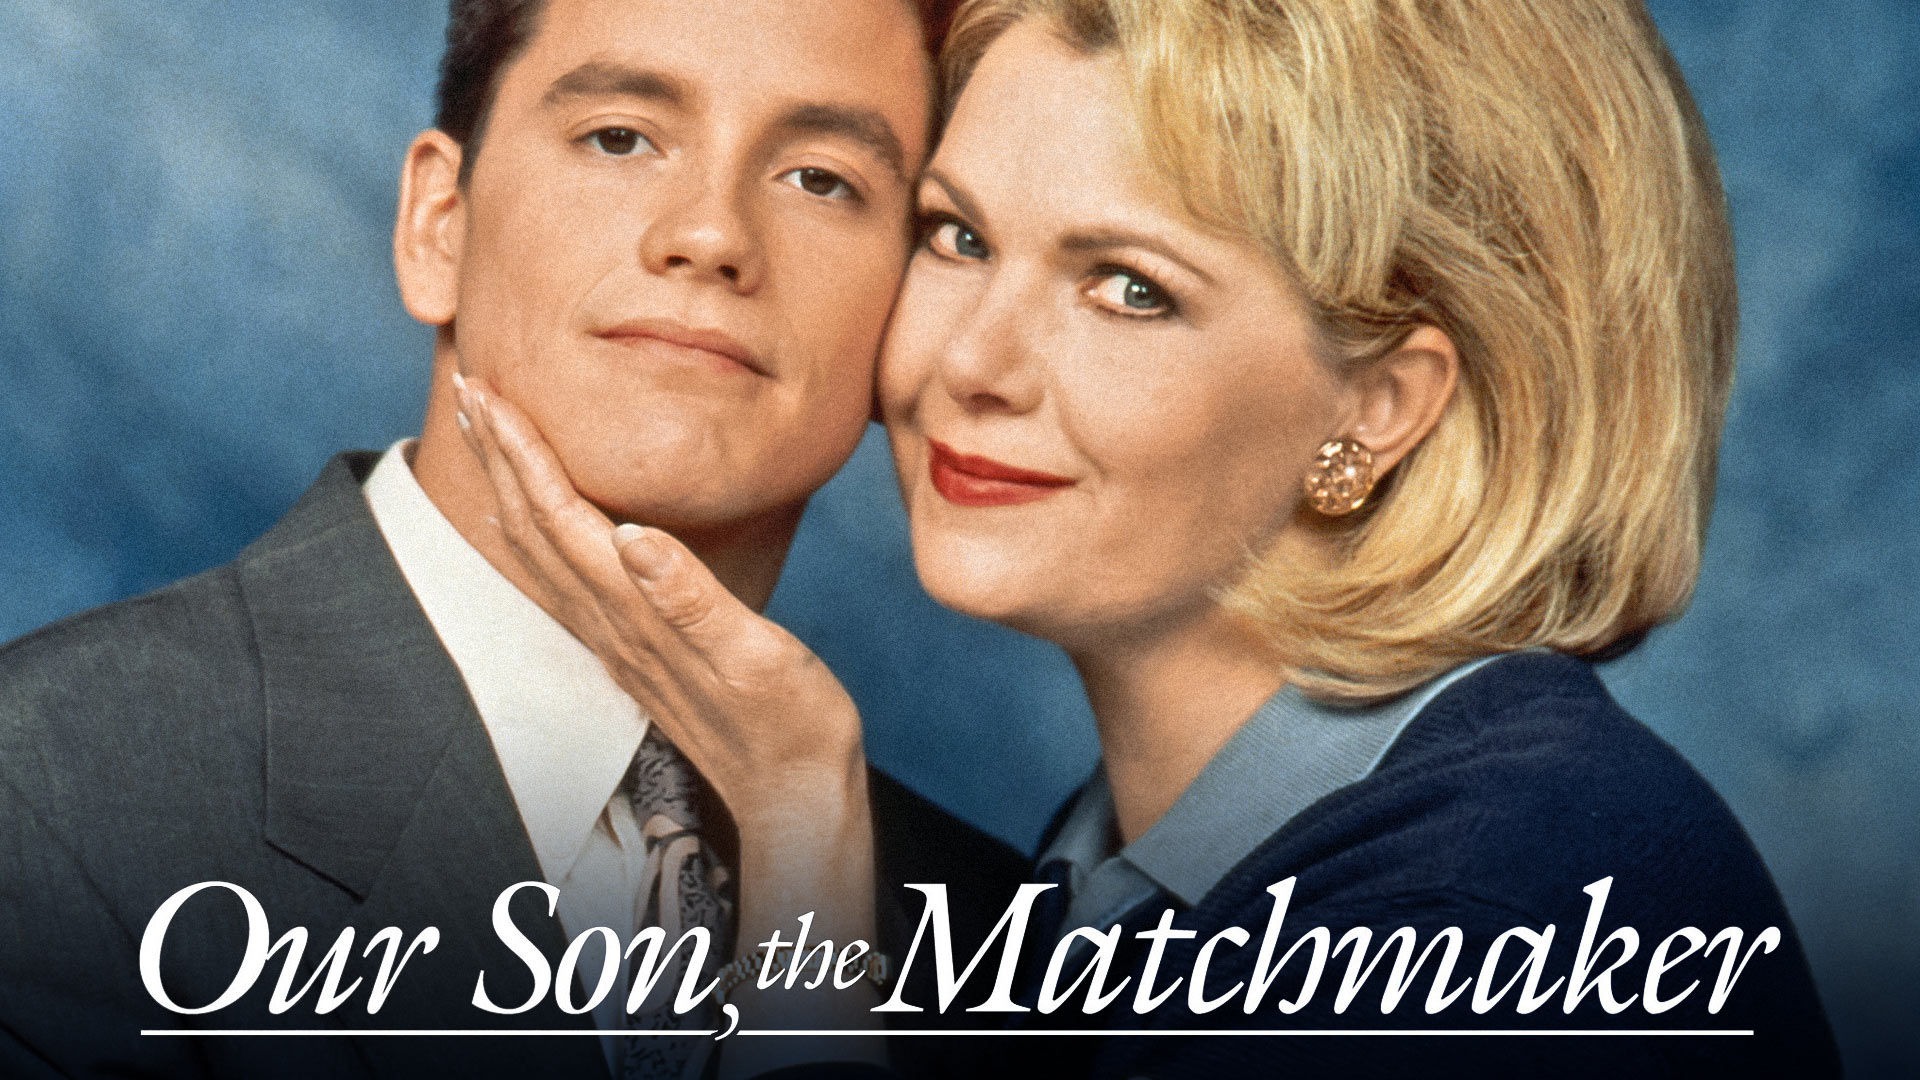 Our Son, the Matchmaker